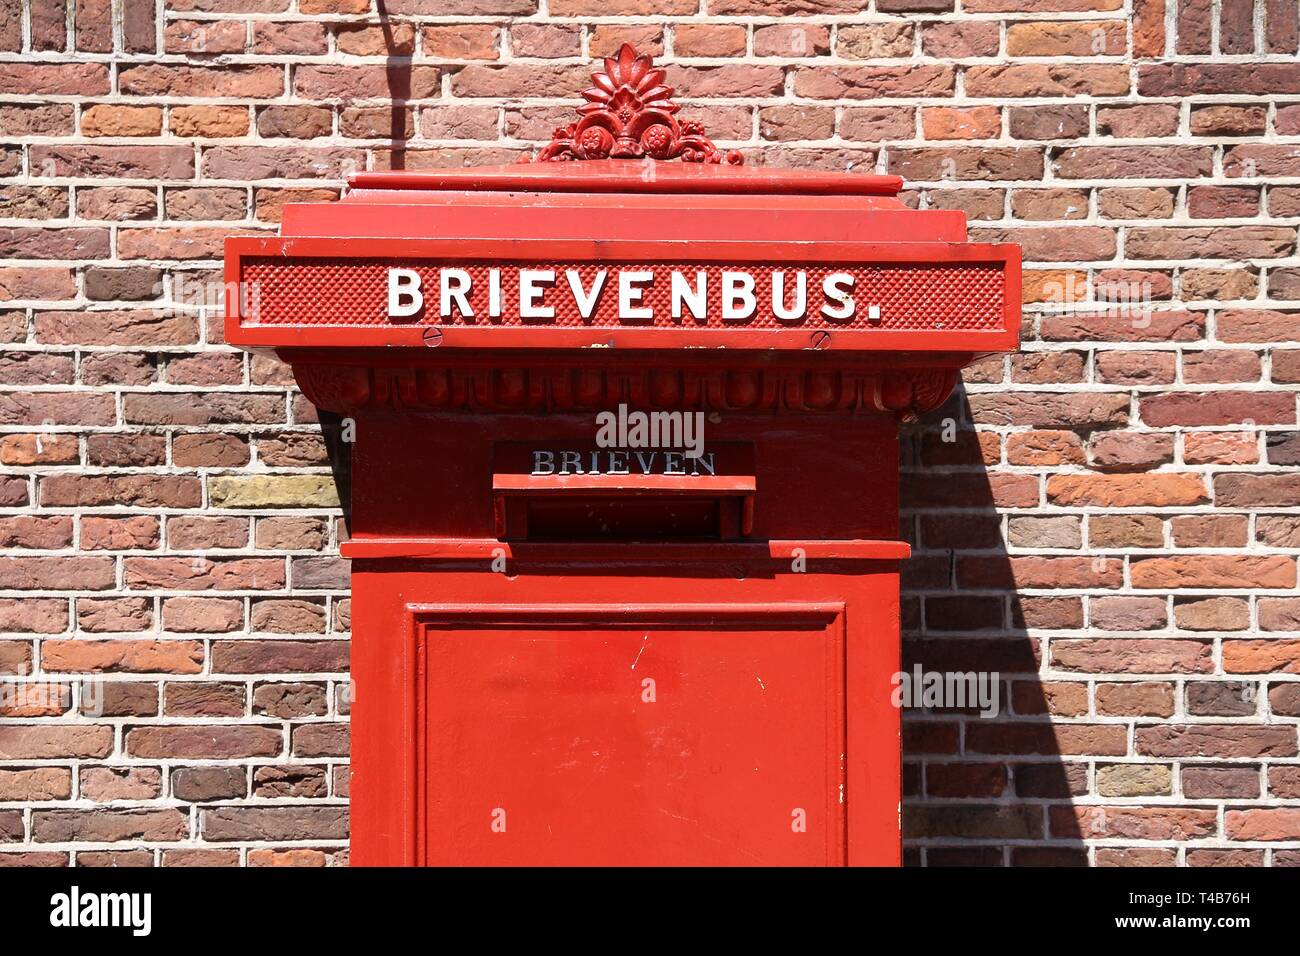 Red post box in Amsterdam, Netherlands. Brievenbus means letter box in  Dutch Stock Photo - Alamy